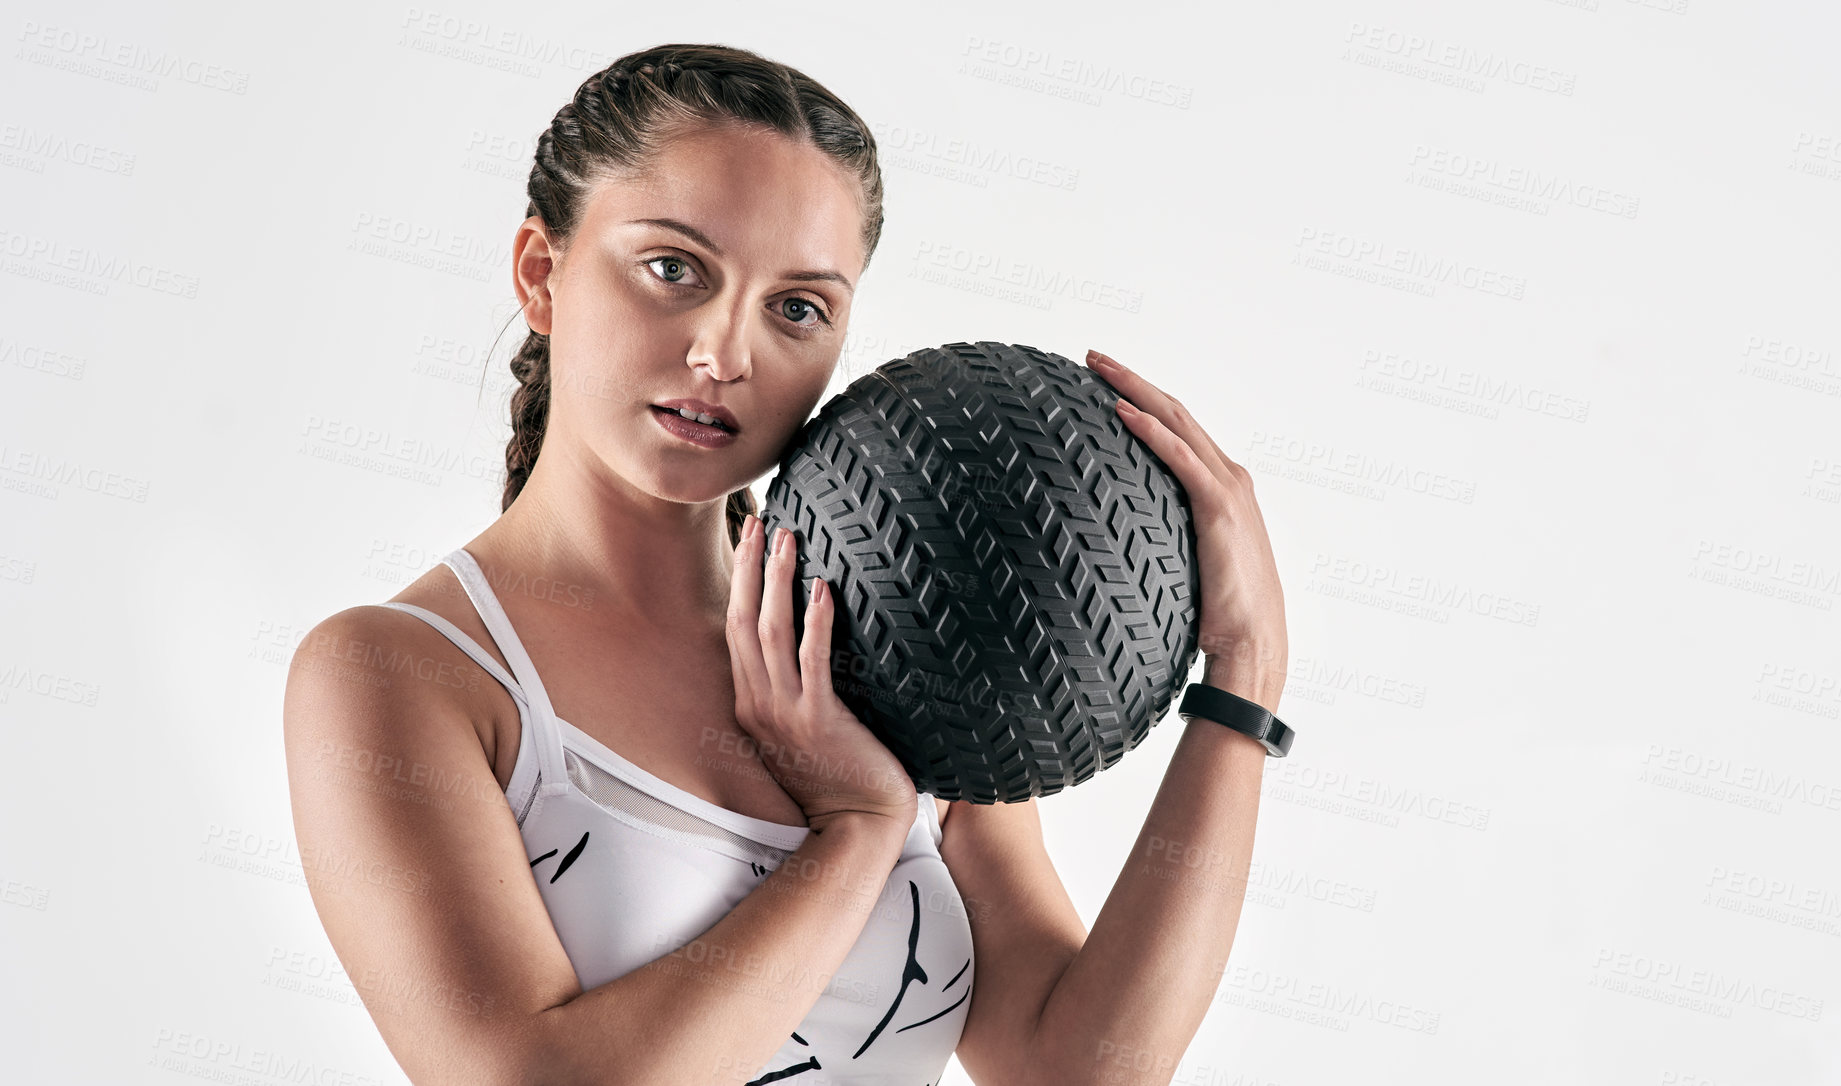 Buy stock photo Studio portrait of a sporty young woman holding an exercise ball against a white background